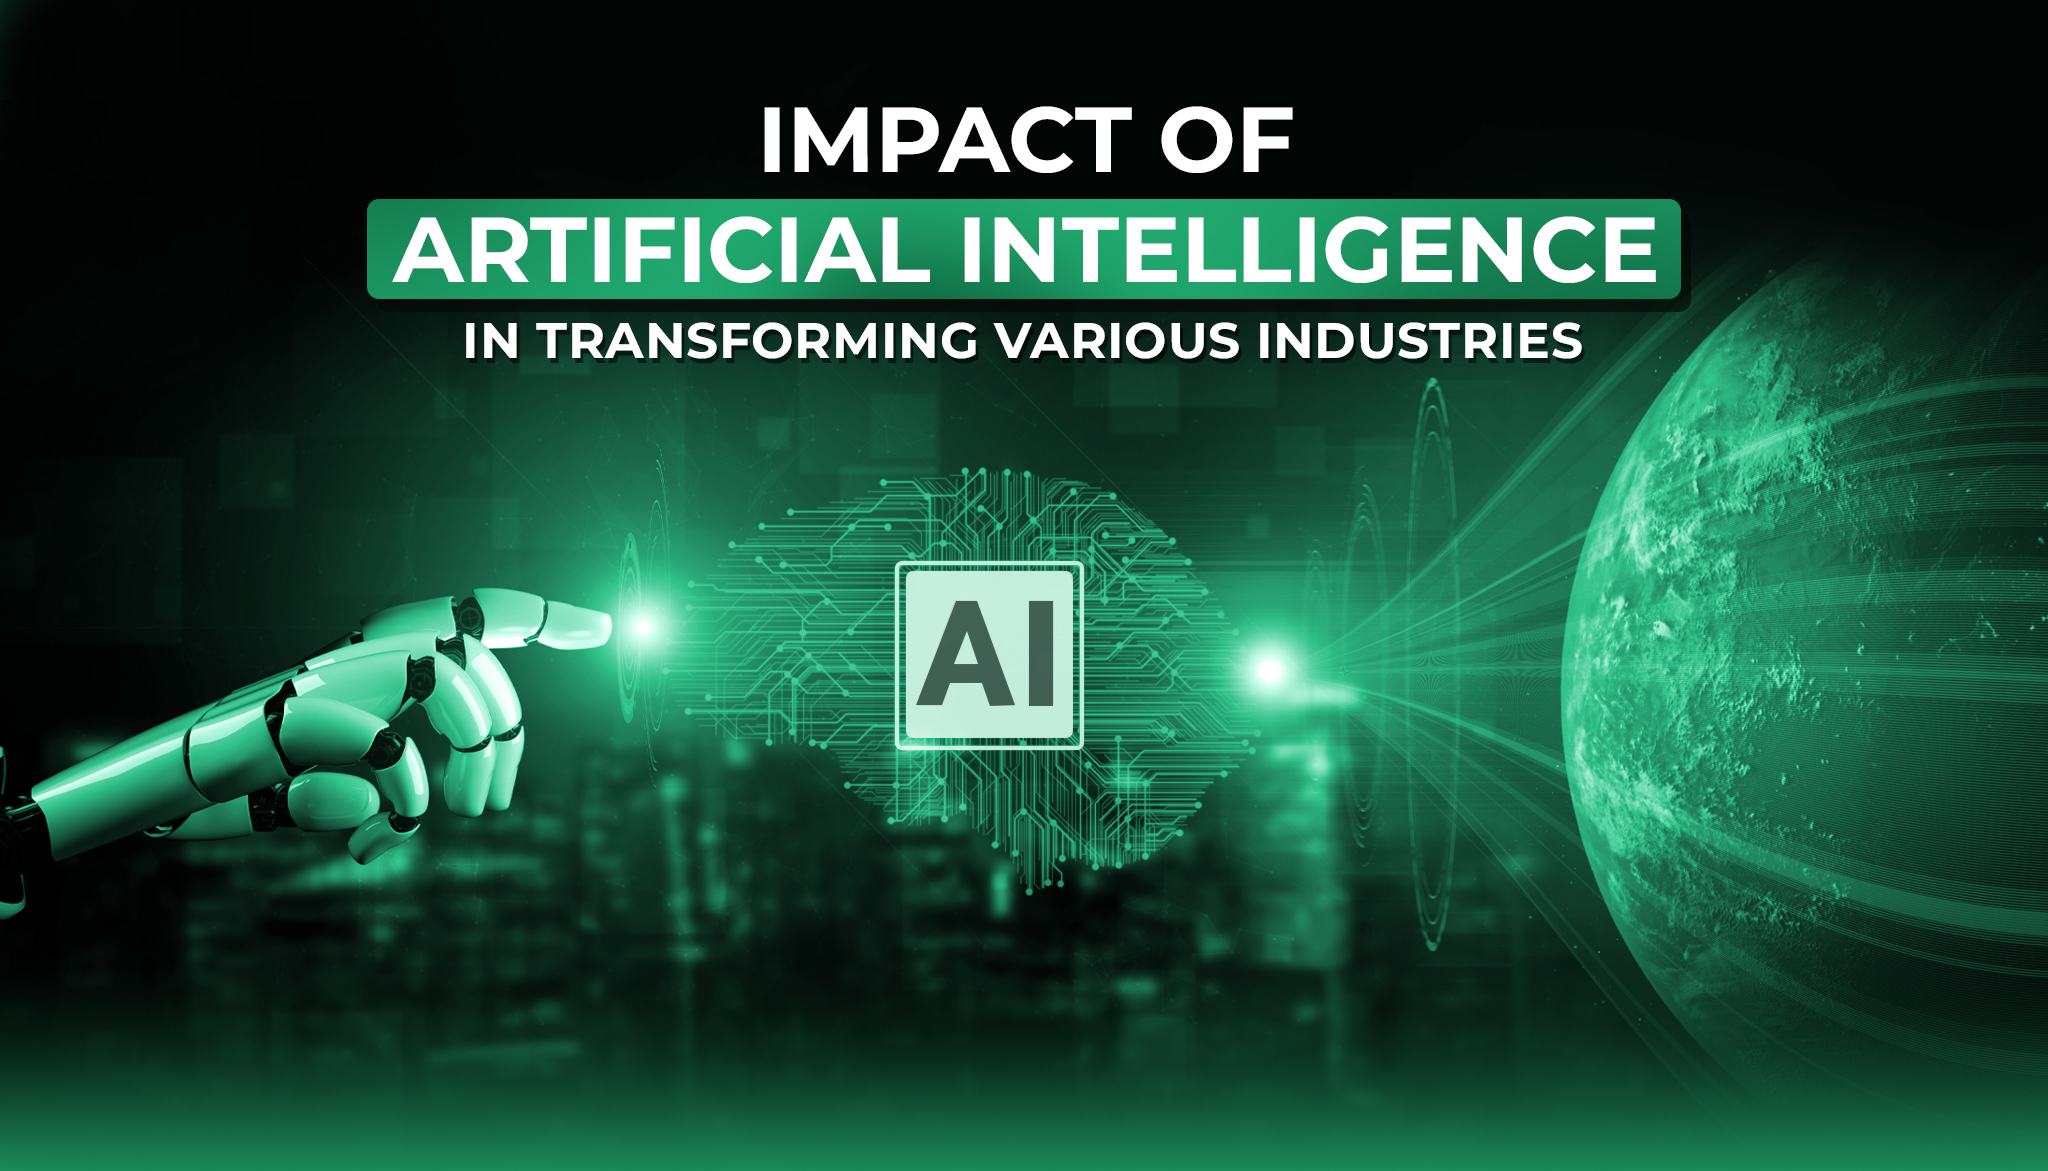 Impact of Artificial Intelligence in Transforming various Industries